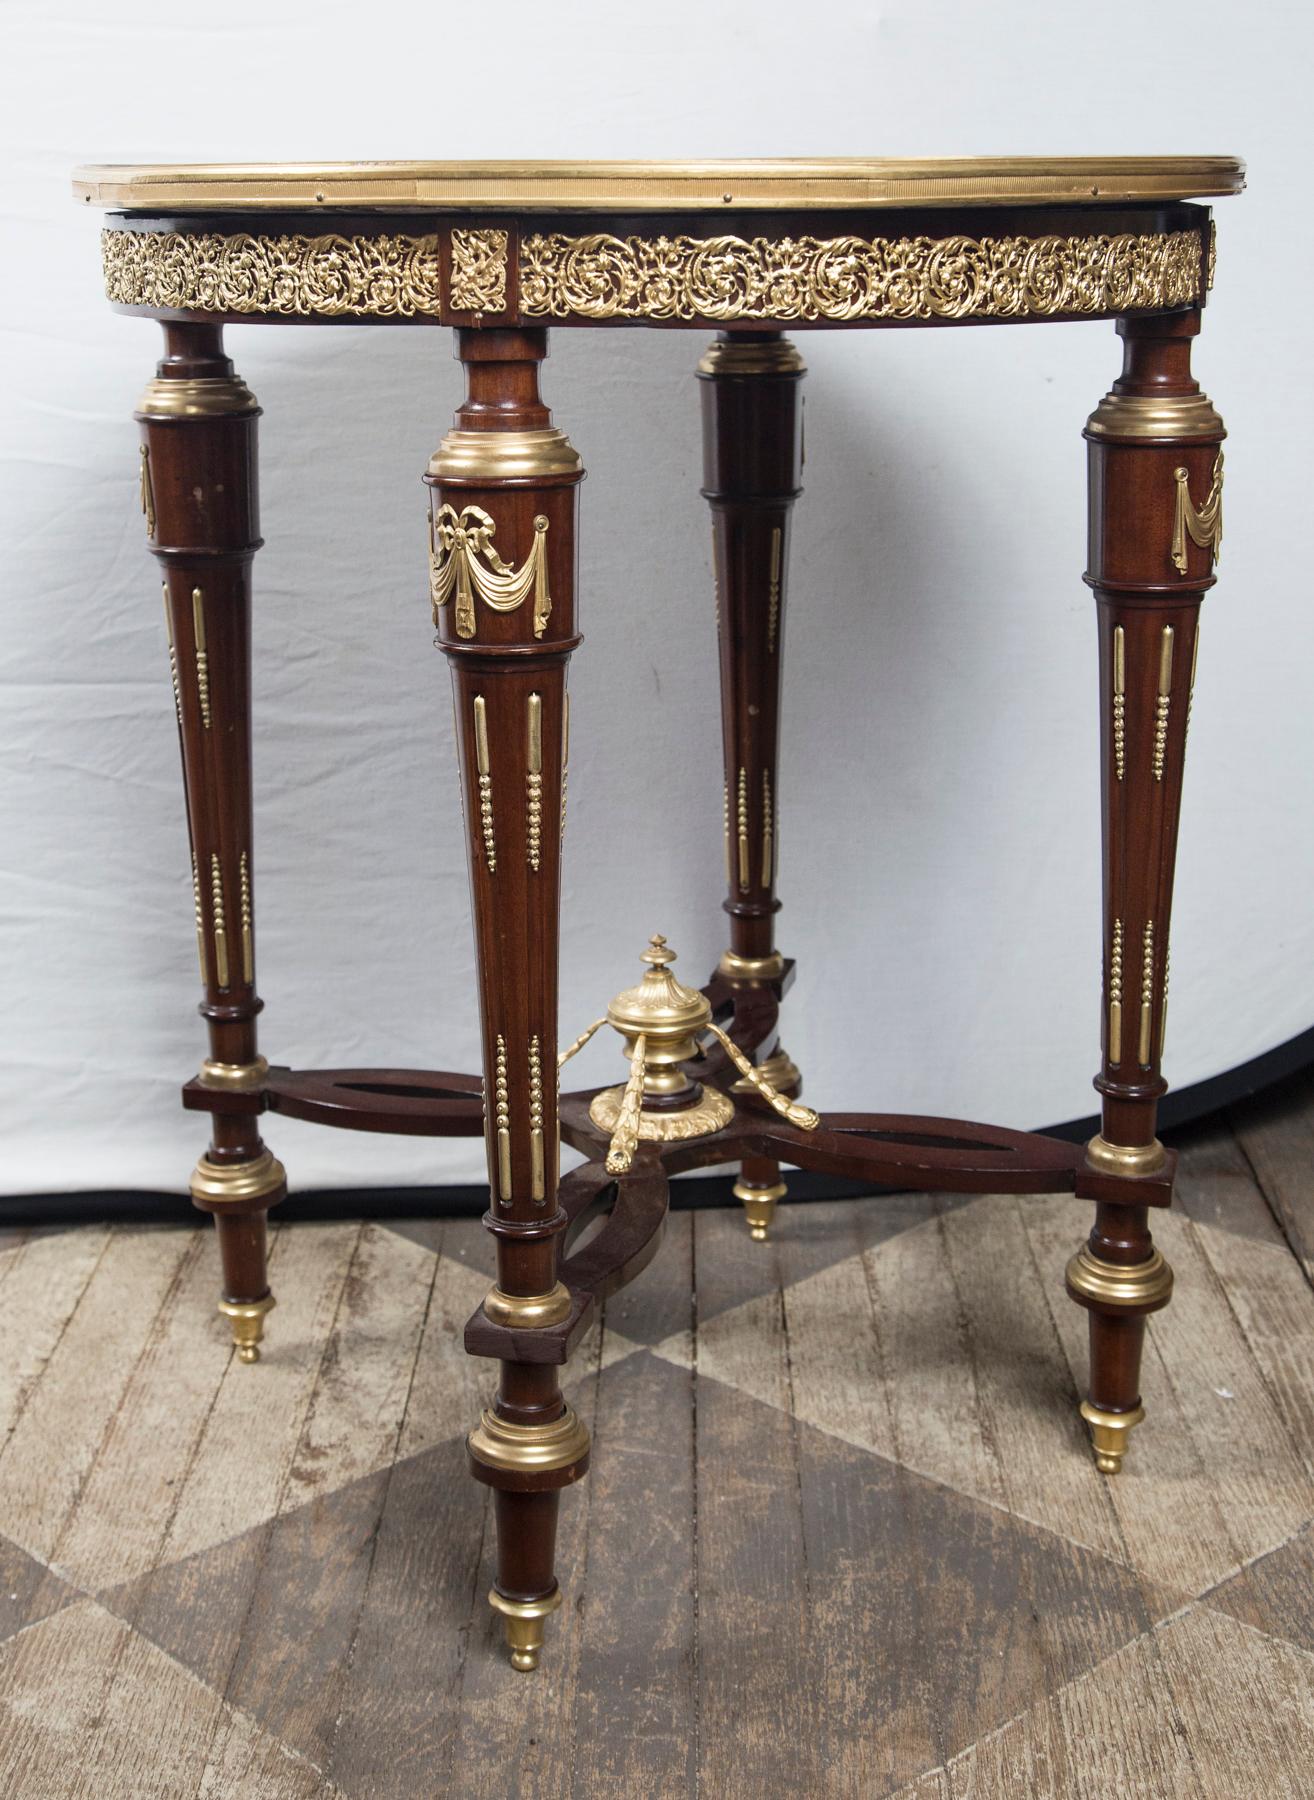 Breche violette marble top with gilt bronze mounts. The four legs attached to an unusual stretcher. topped with an urn shaped finial and four supports.